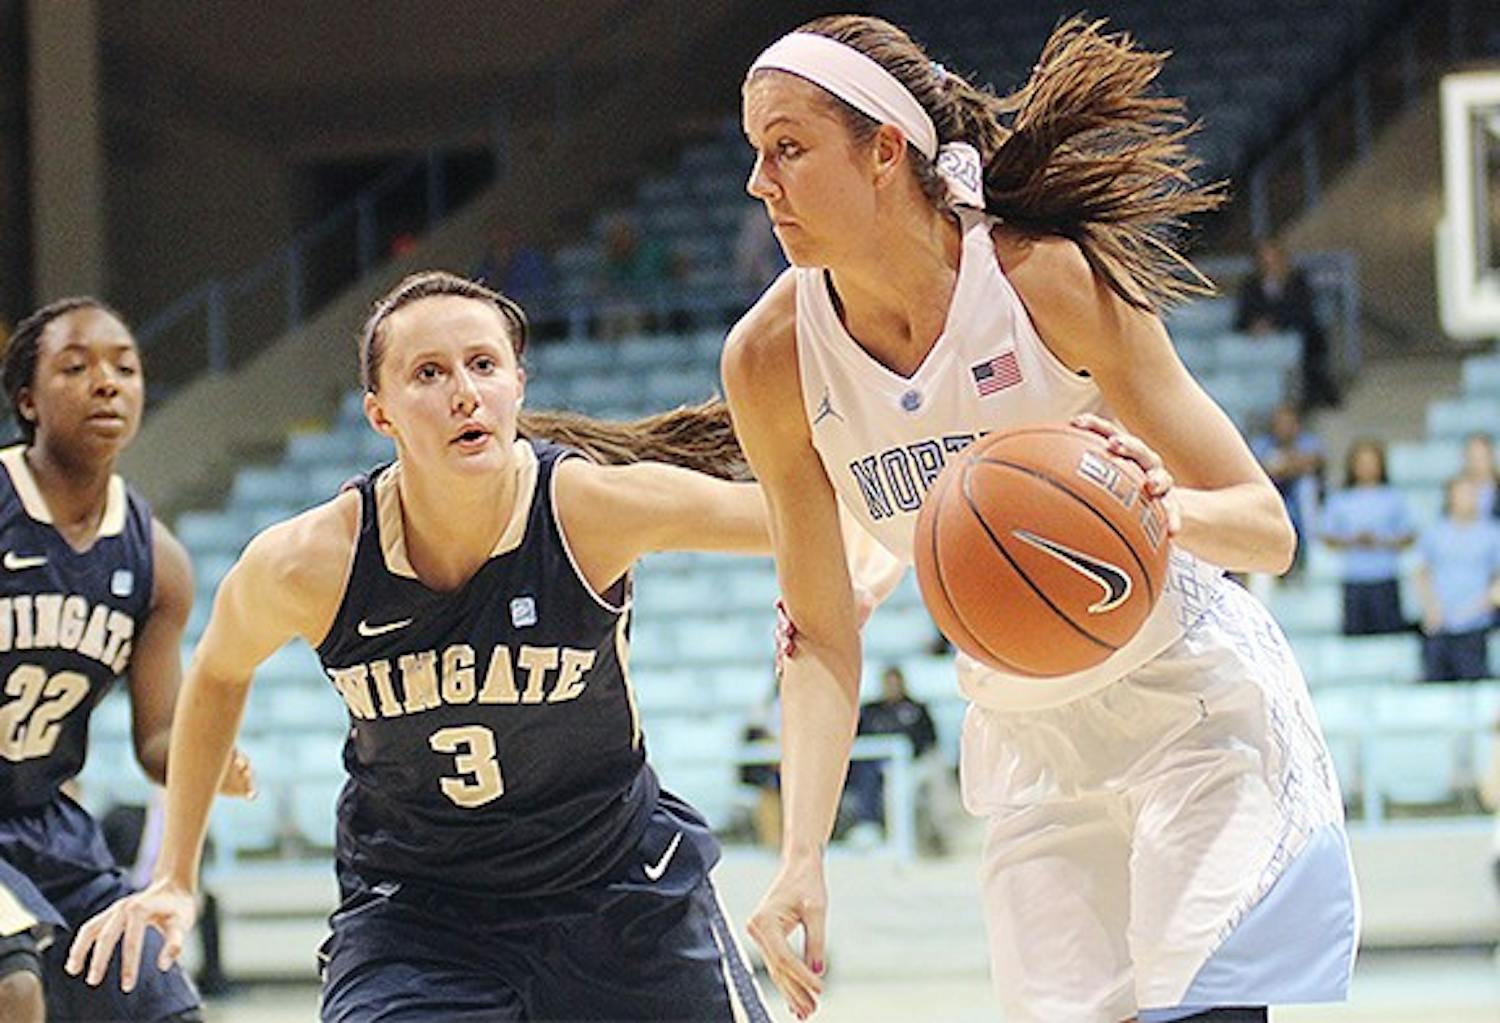 Women's Basketball Exhibtion Game vs. Wingate on Tuesday November 5th